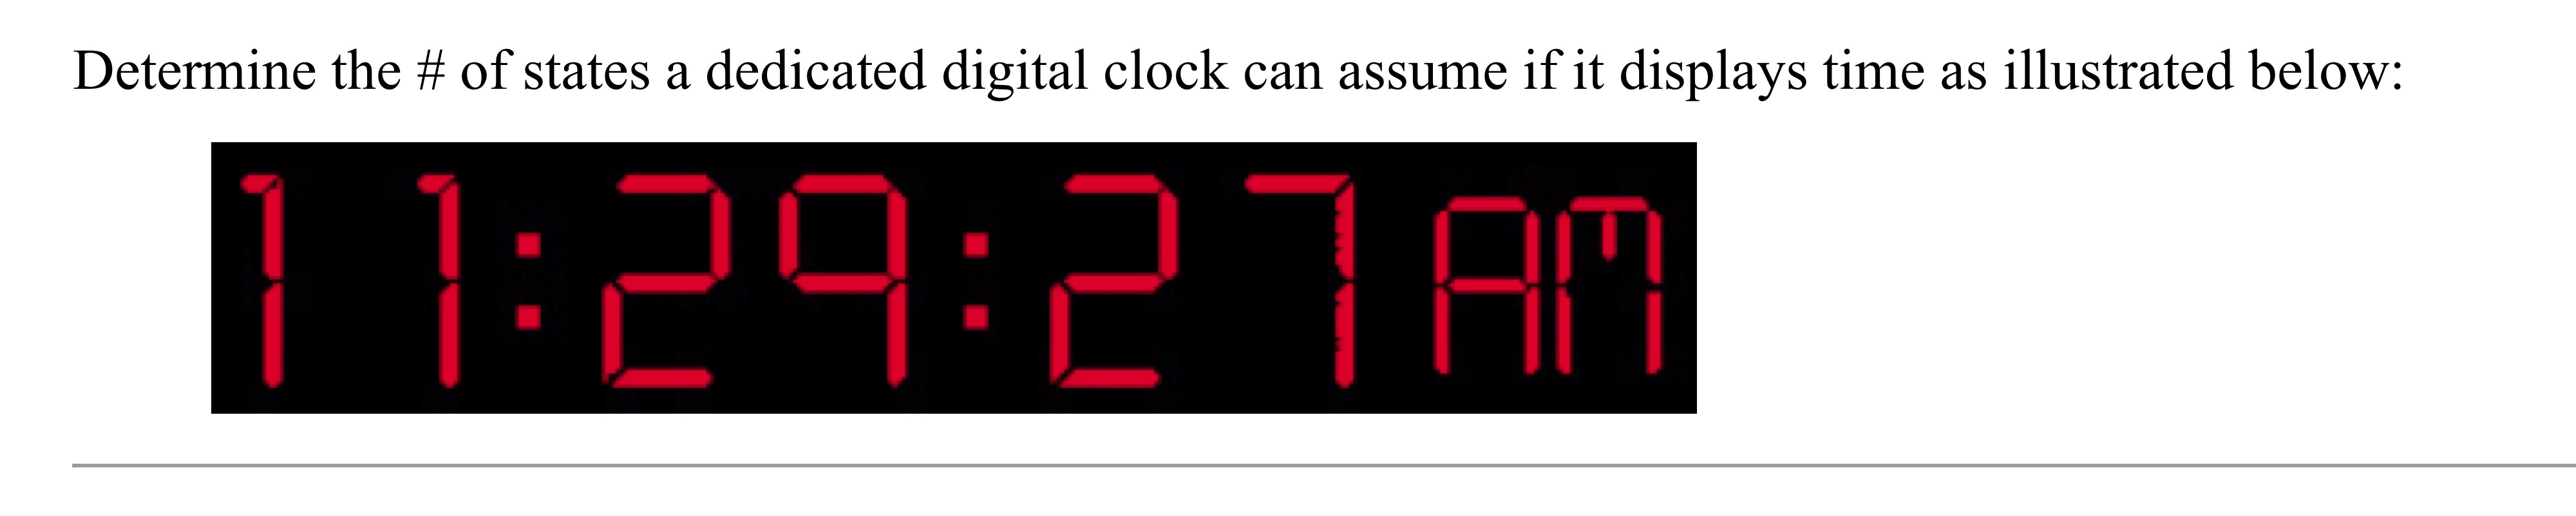 Determine the # of states a dedicated digital clock can assume if it displays time as illustrated below: